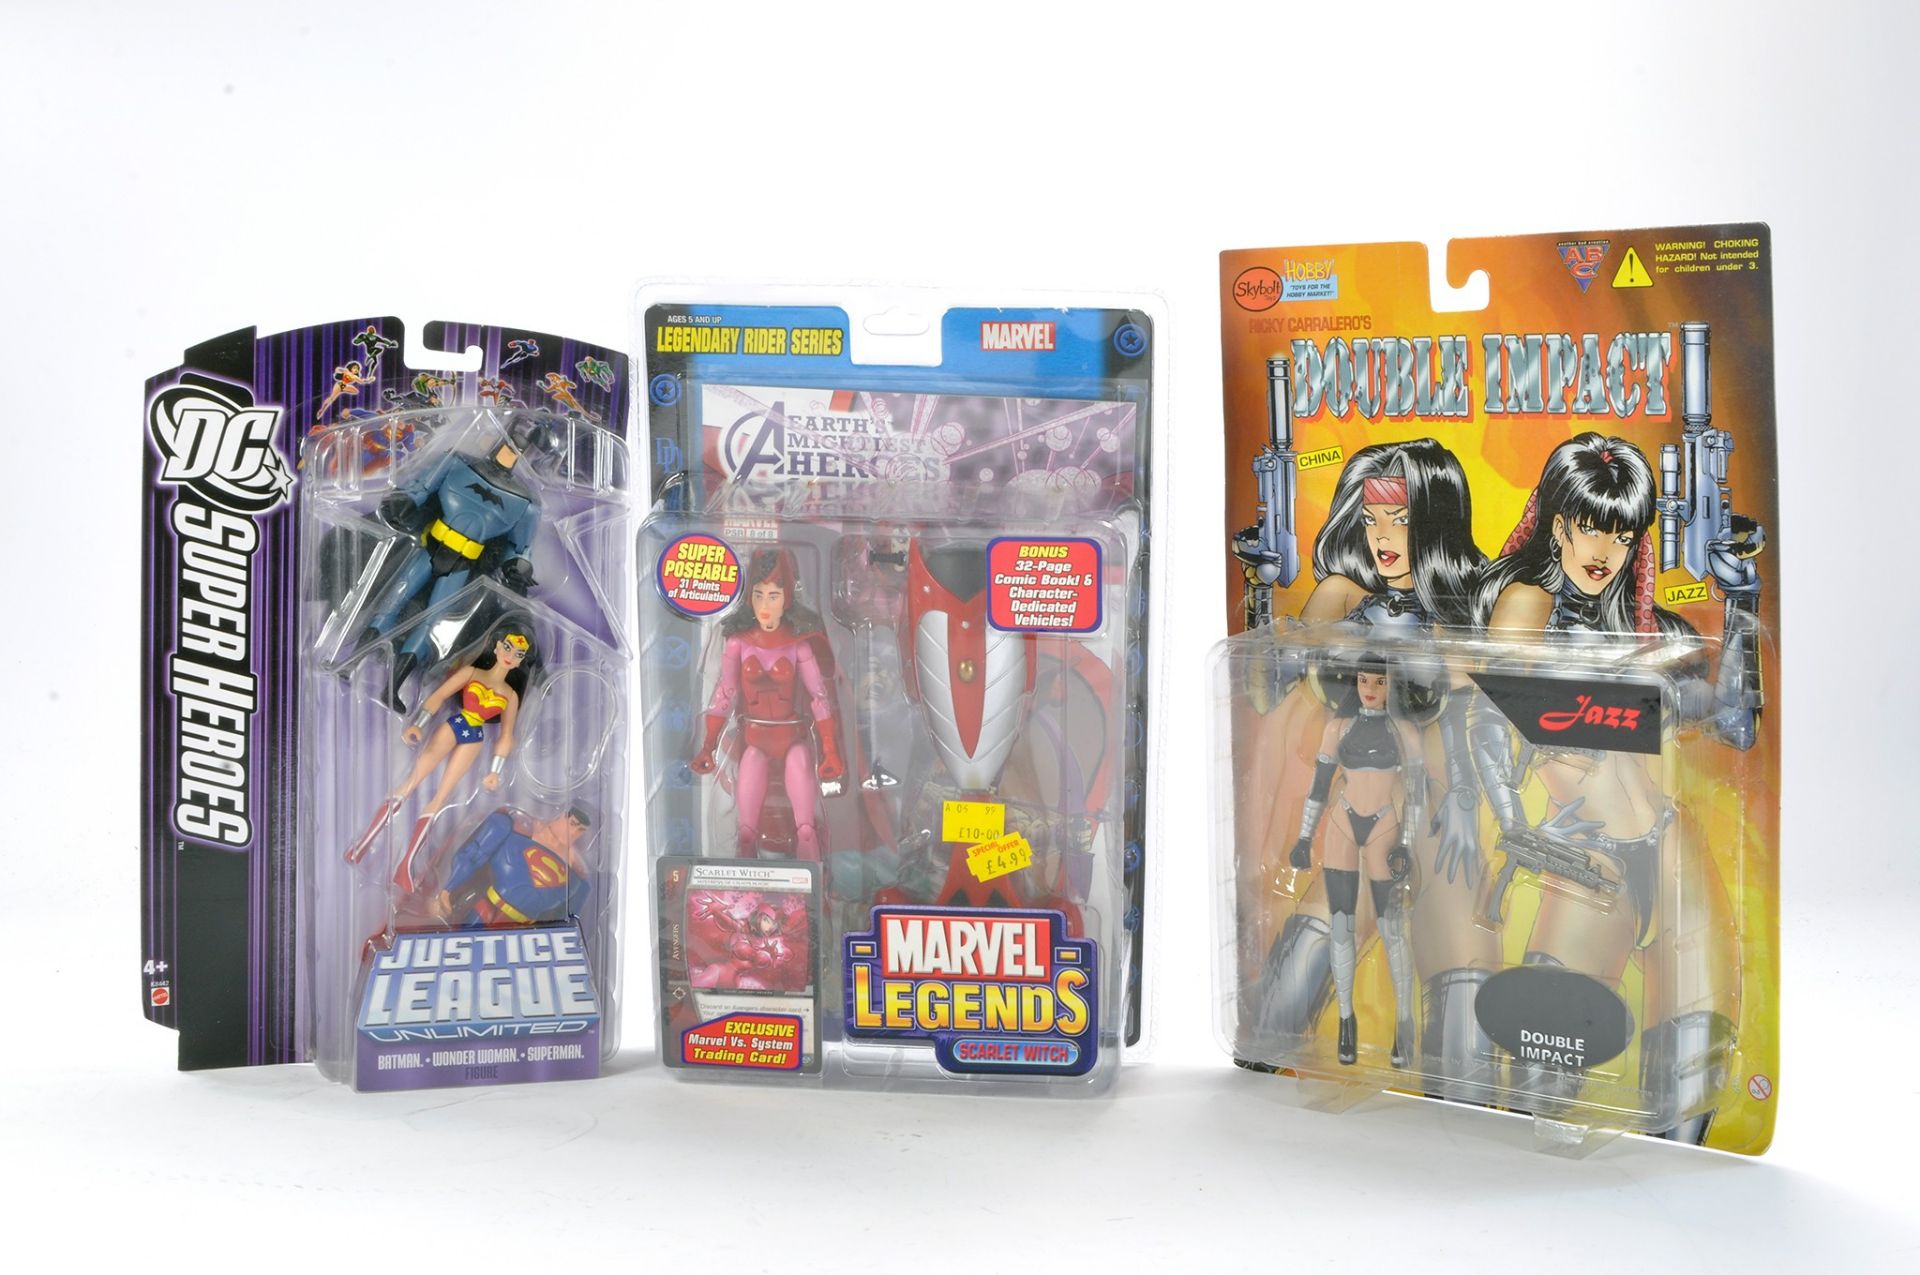 Mattel, Skybolt and Toy Biz Action figures comprising Marvel Legends, Justice League and Jazz from